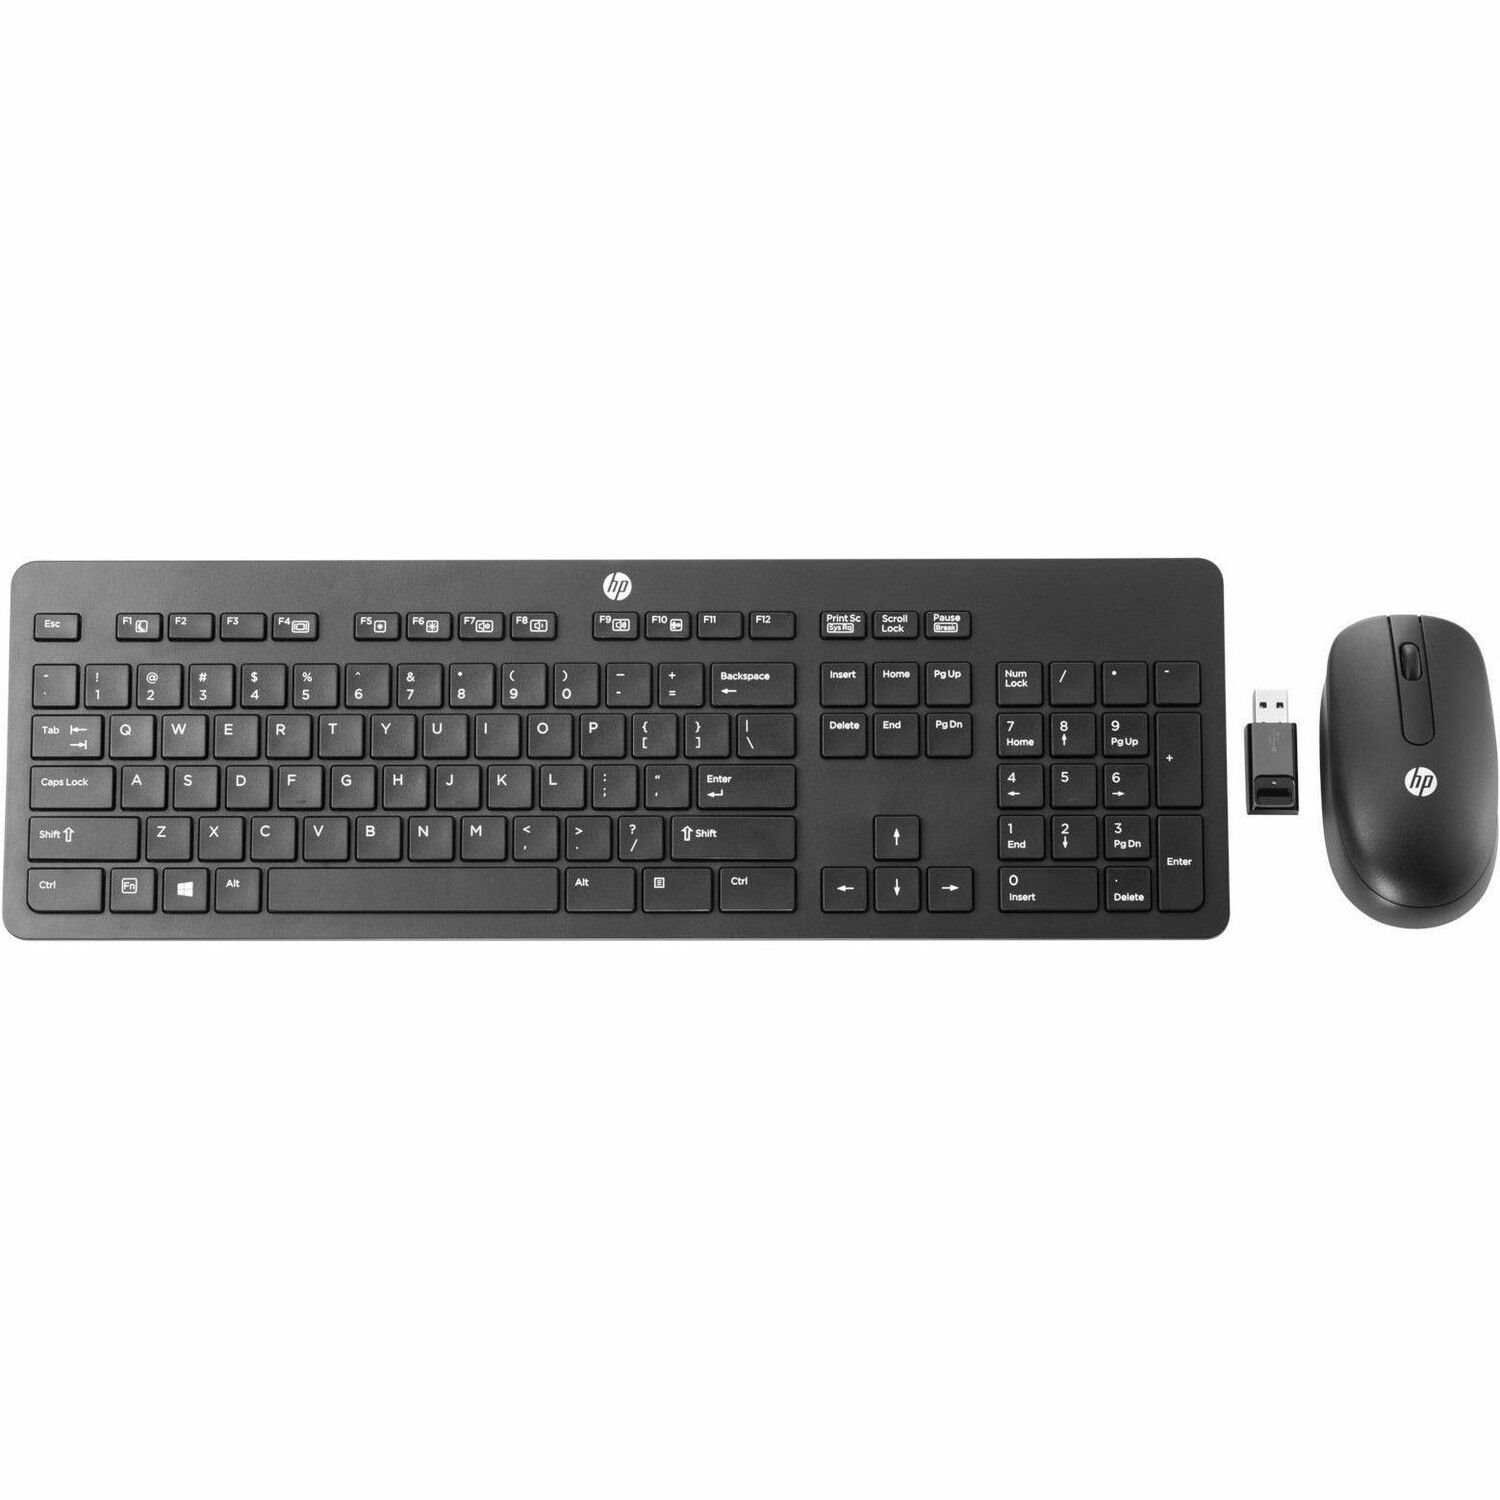 HPI SOURCING - NEW Slim Wireless Keyboard & Mouse